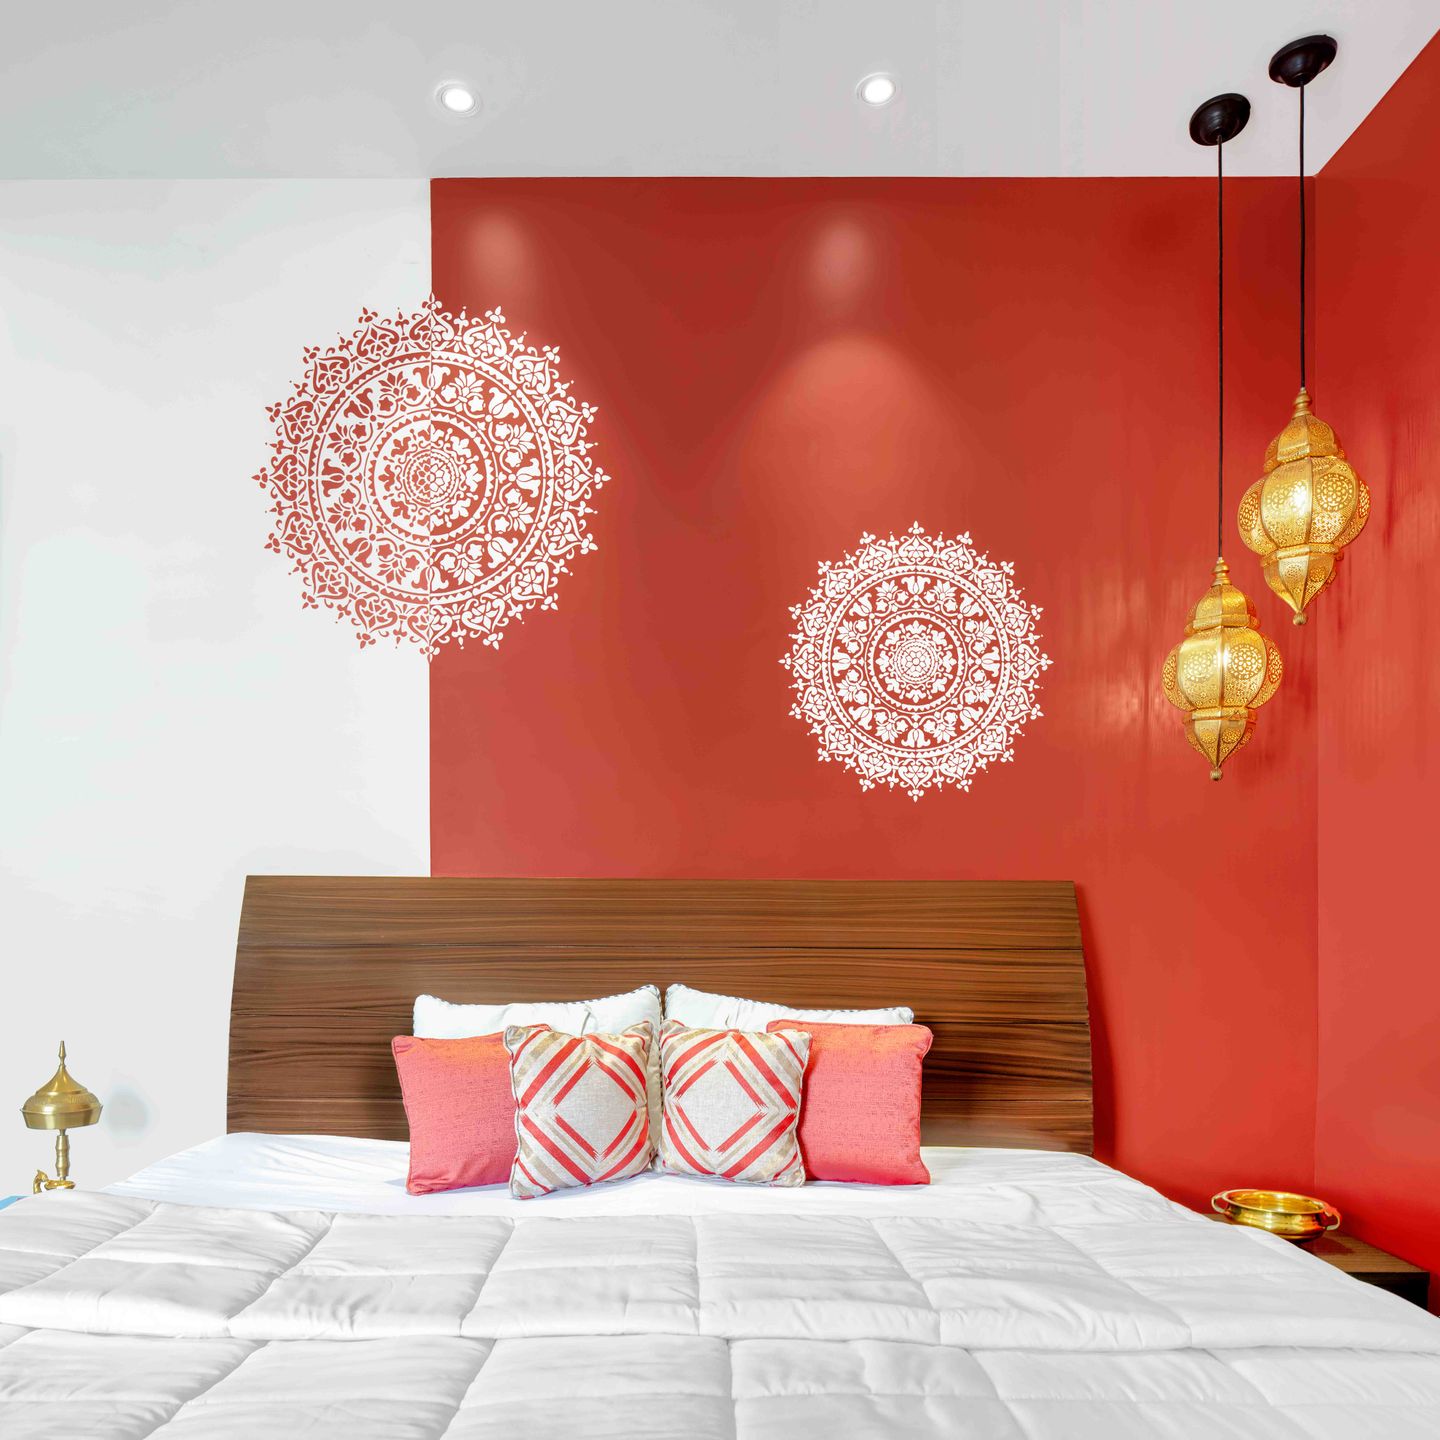 Red And White Bedroom Wall Paint Design With Motifs - Livspace